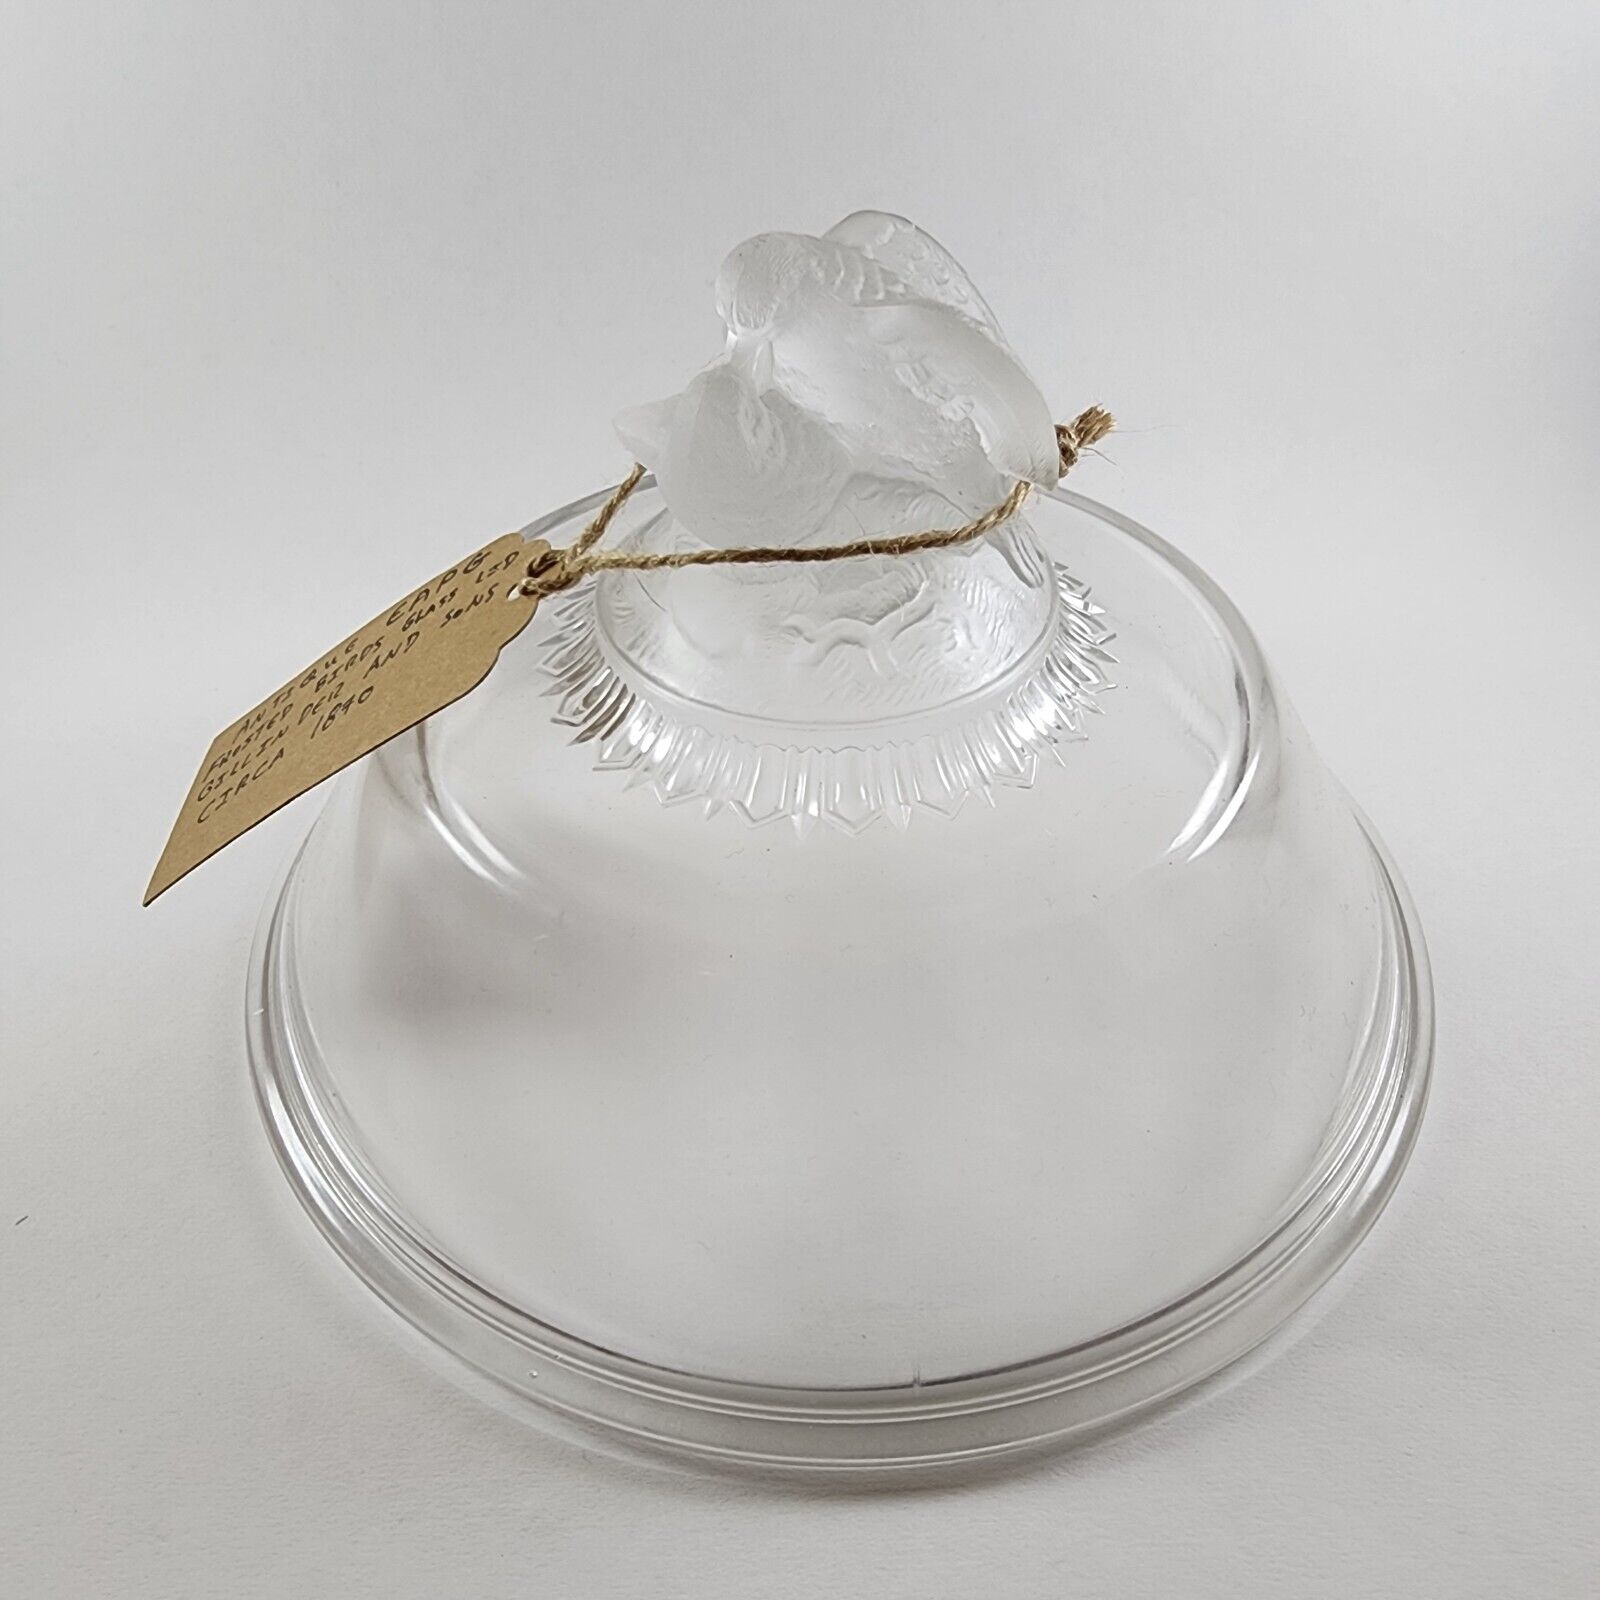 ANTIQUE EAPG FROSTED BIRDS GLASS LID GILLINDER AND SONS CIRCA 1870 MINT COND.